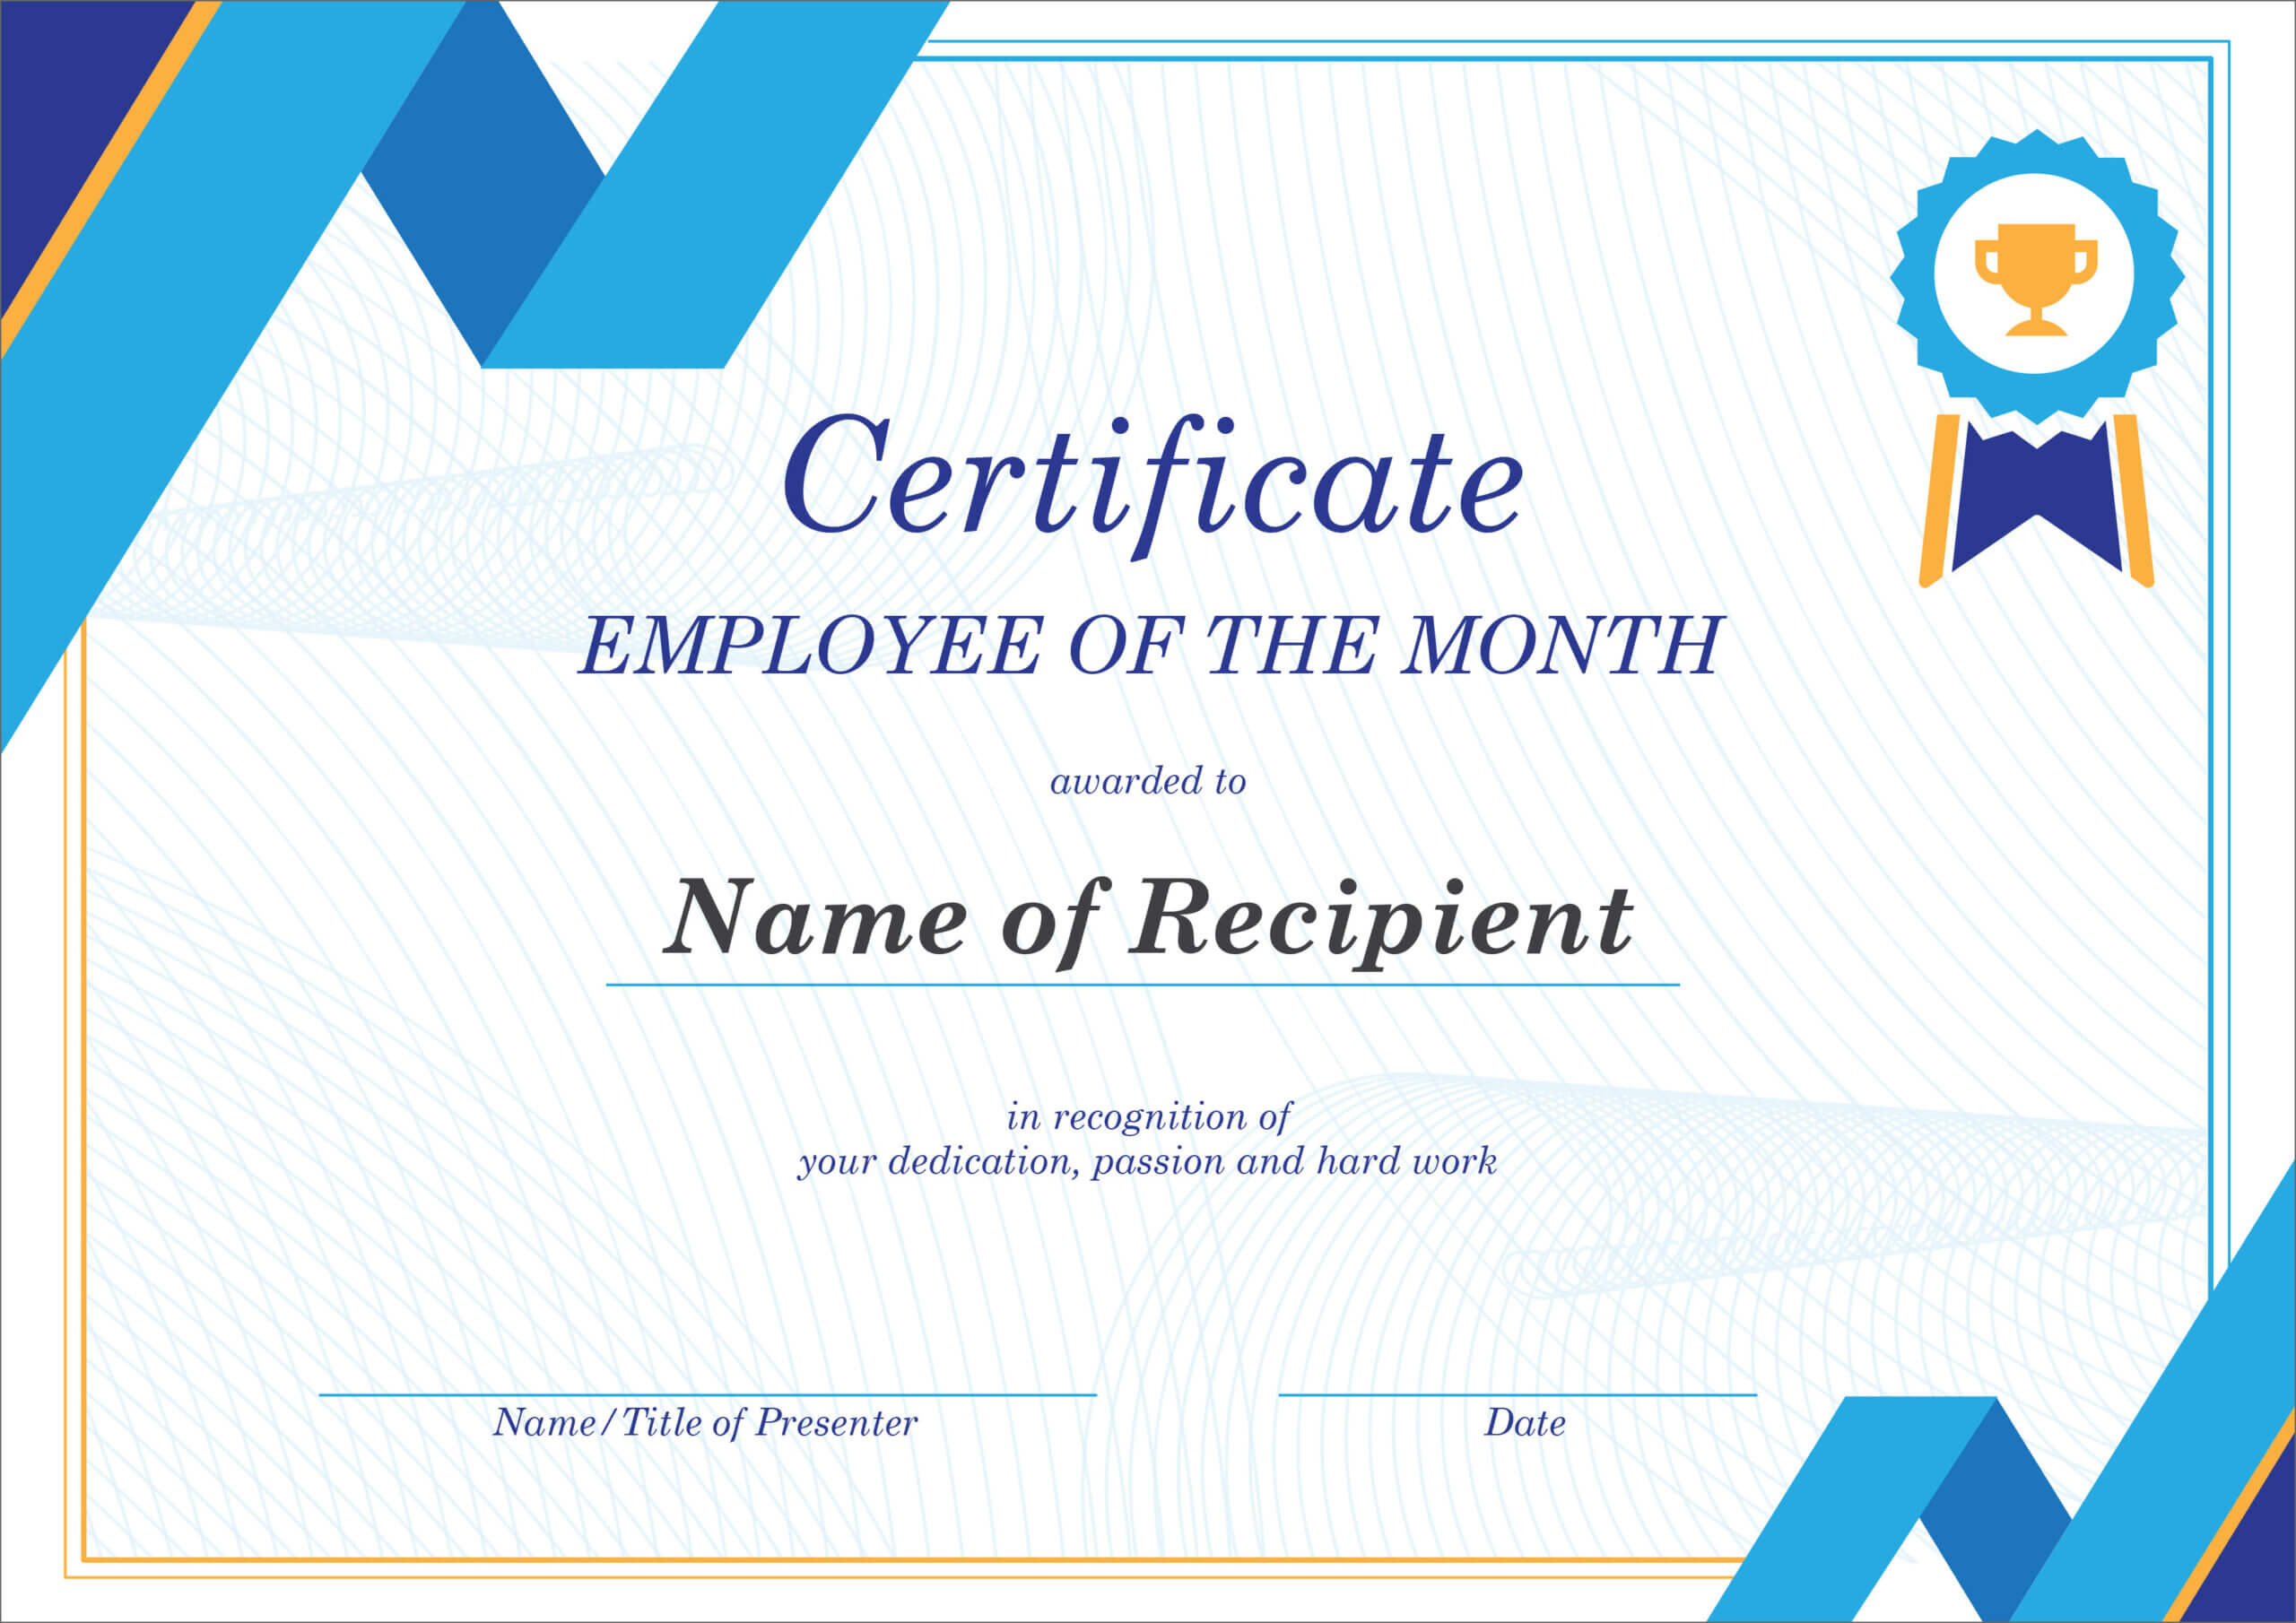 50 Free Creative Blank Certificate Templates In Psd For Employee with Fresh Free Printable Blank Award Certificate Templates